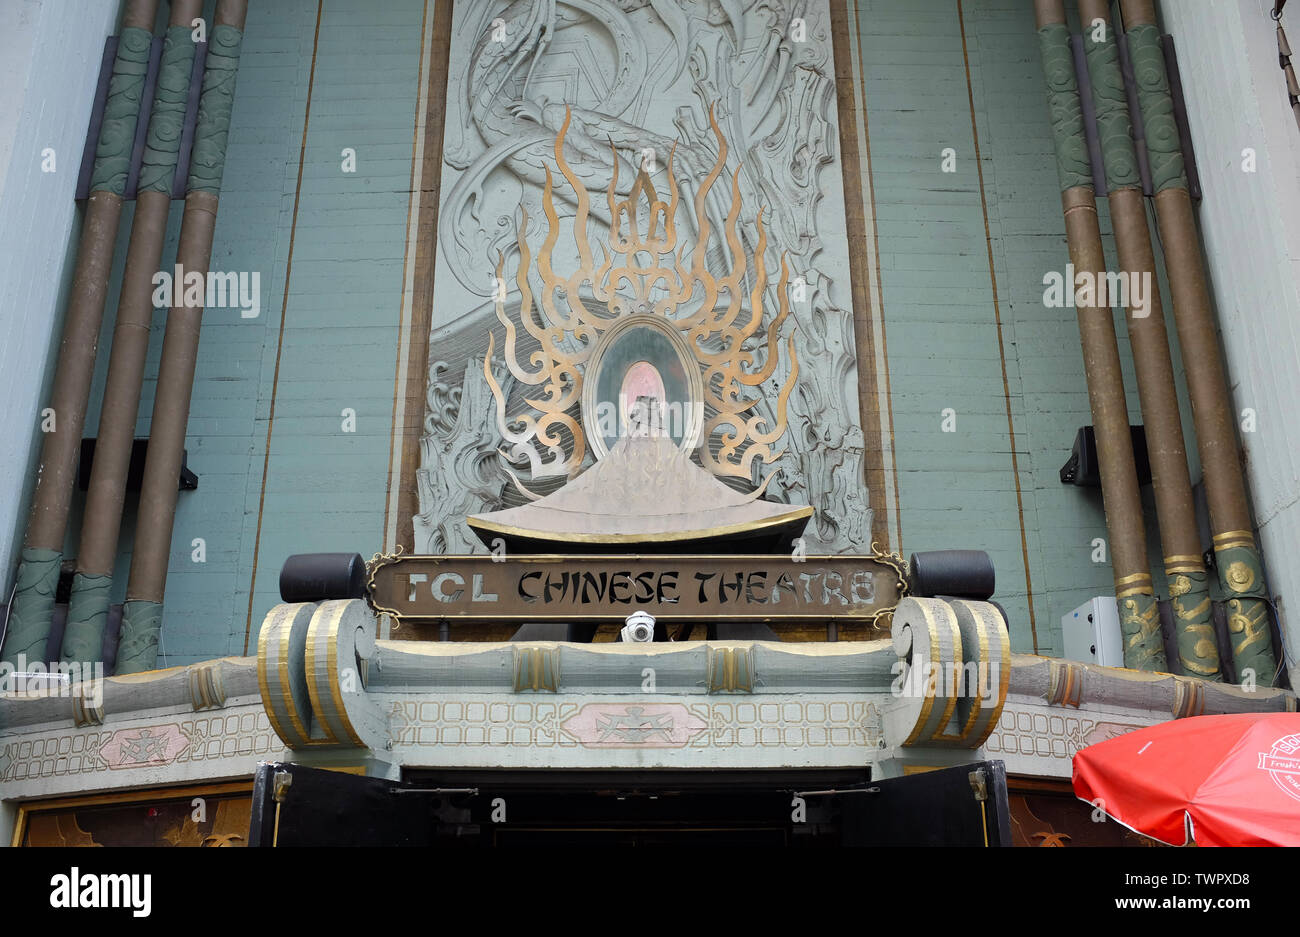 HOLLYWOOD - CALIFORNIA: JUNE 18, 2019: TCL Chinese Theatre sign above the entrance to the movie palace on the historic Hollywood Walk of Fame, Stock Photo